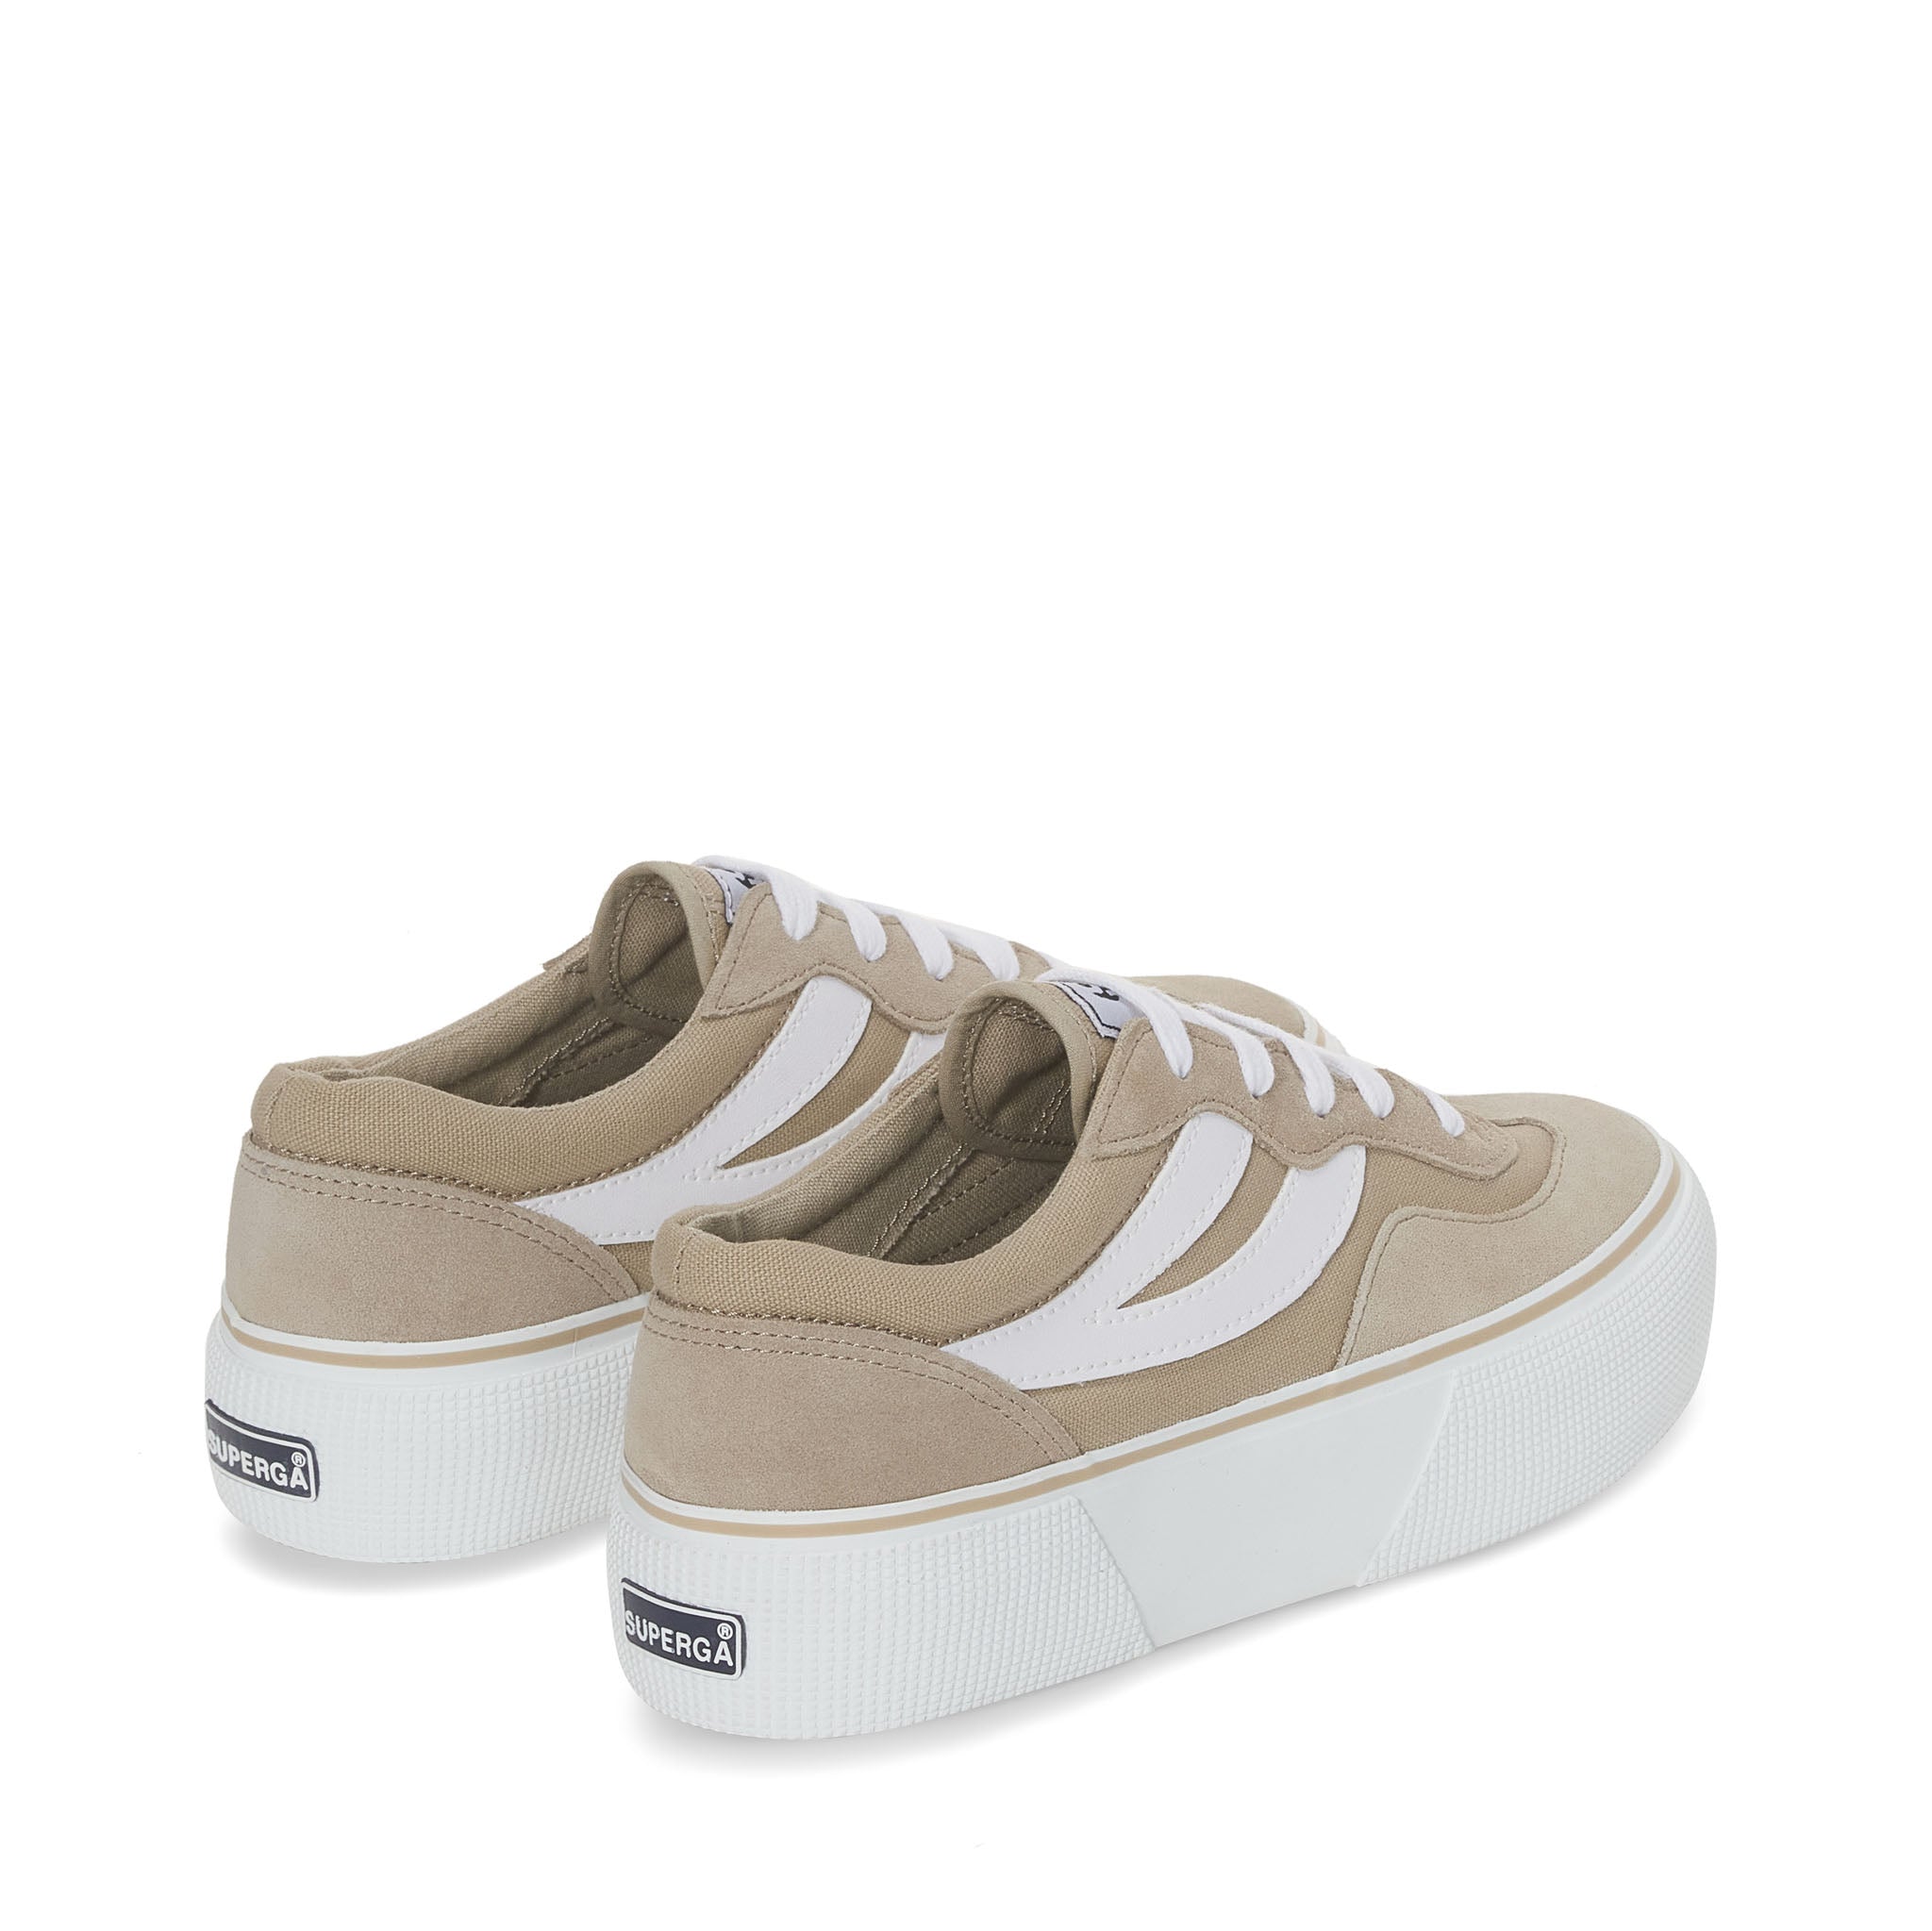 Superga 3041 Revolley Colorblock Platform Sneakers - Grey Fossil Off White. Back view